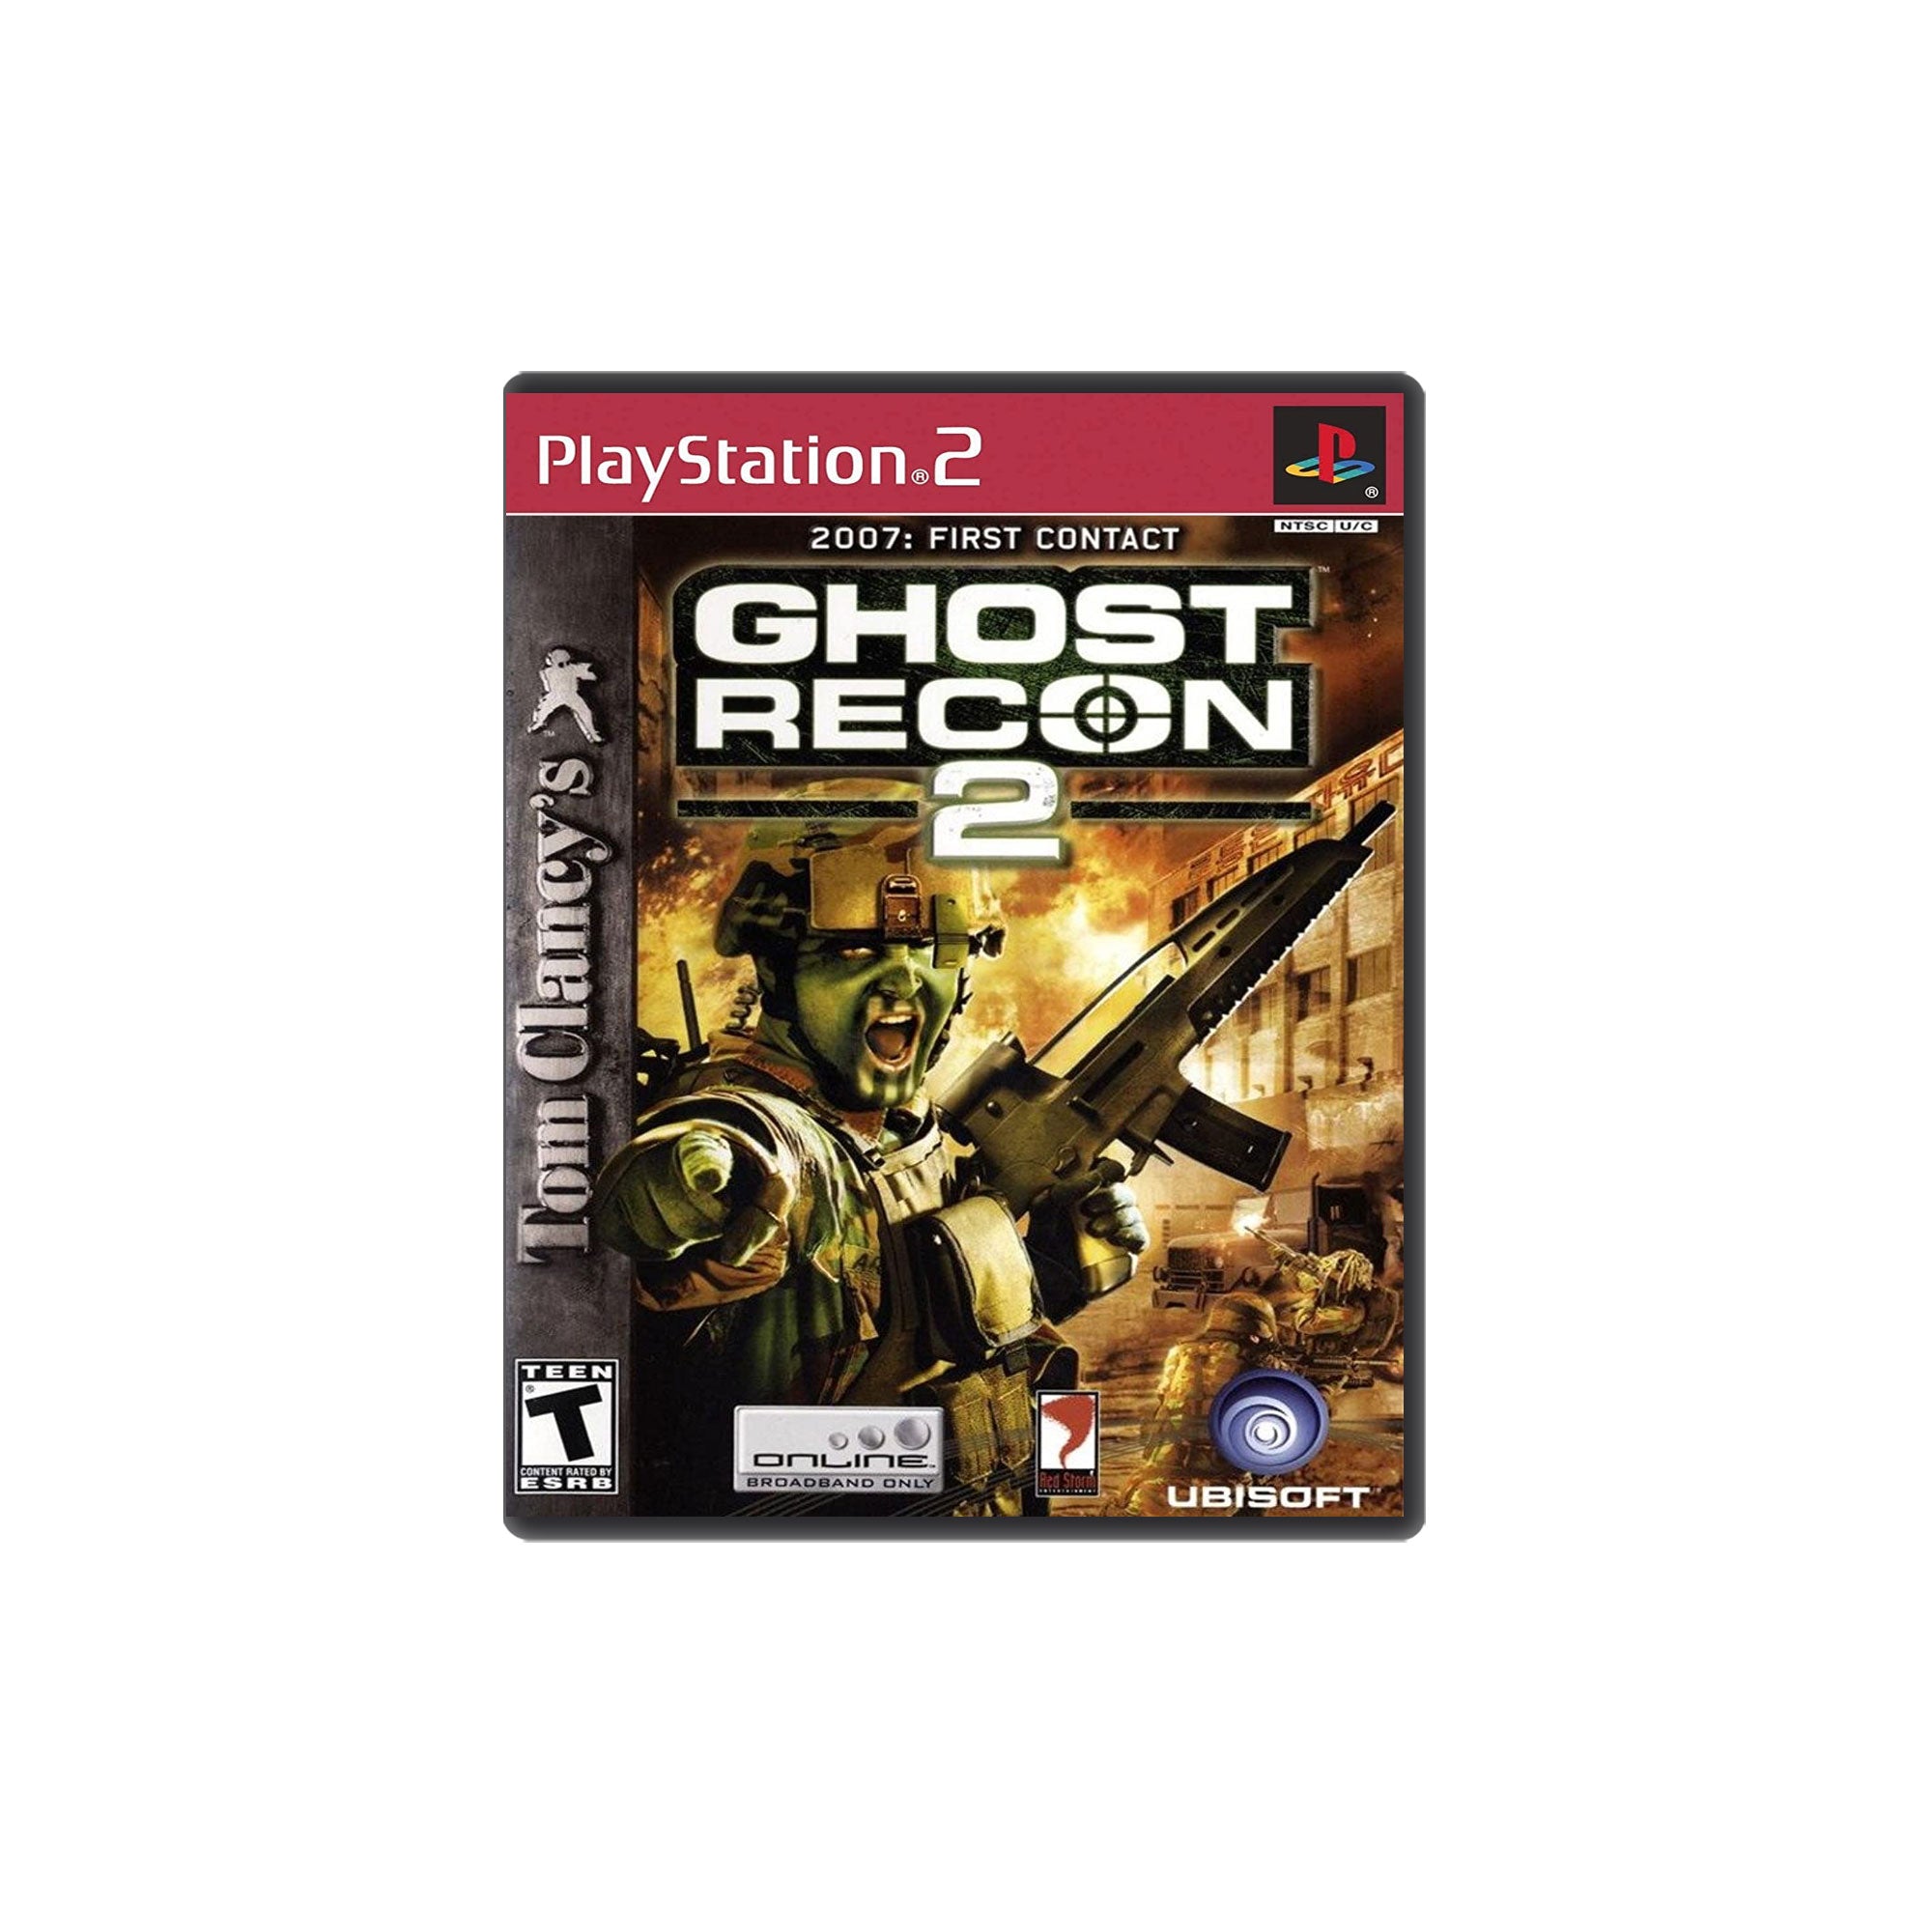 Swifty Games - Tom Clancy's Ghost Recon 2 - Greatest Hits (Playstation 2, 2004)